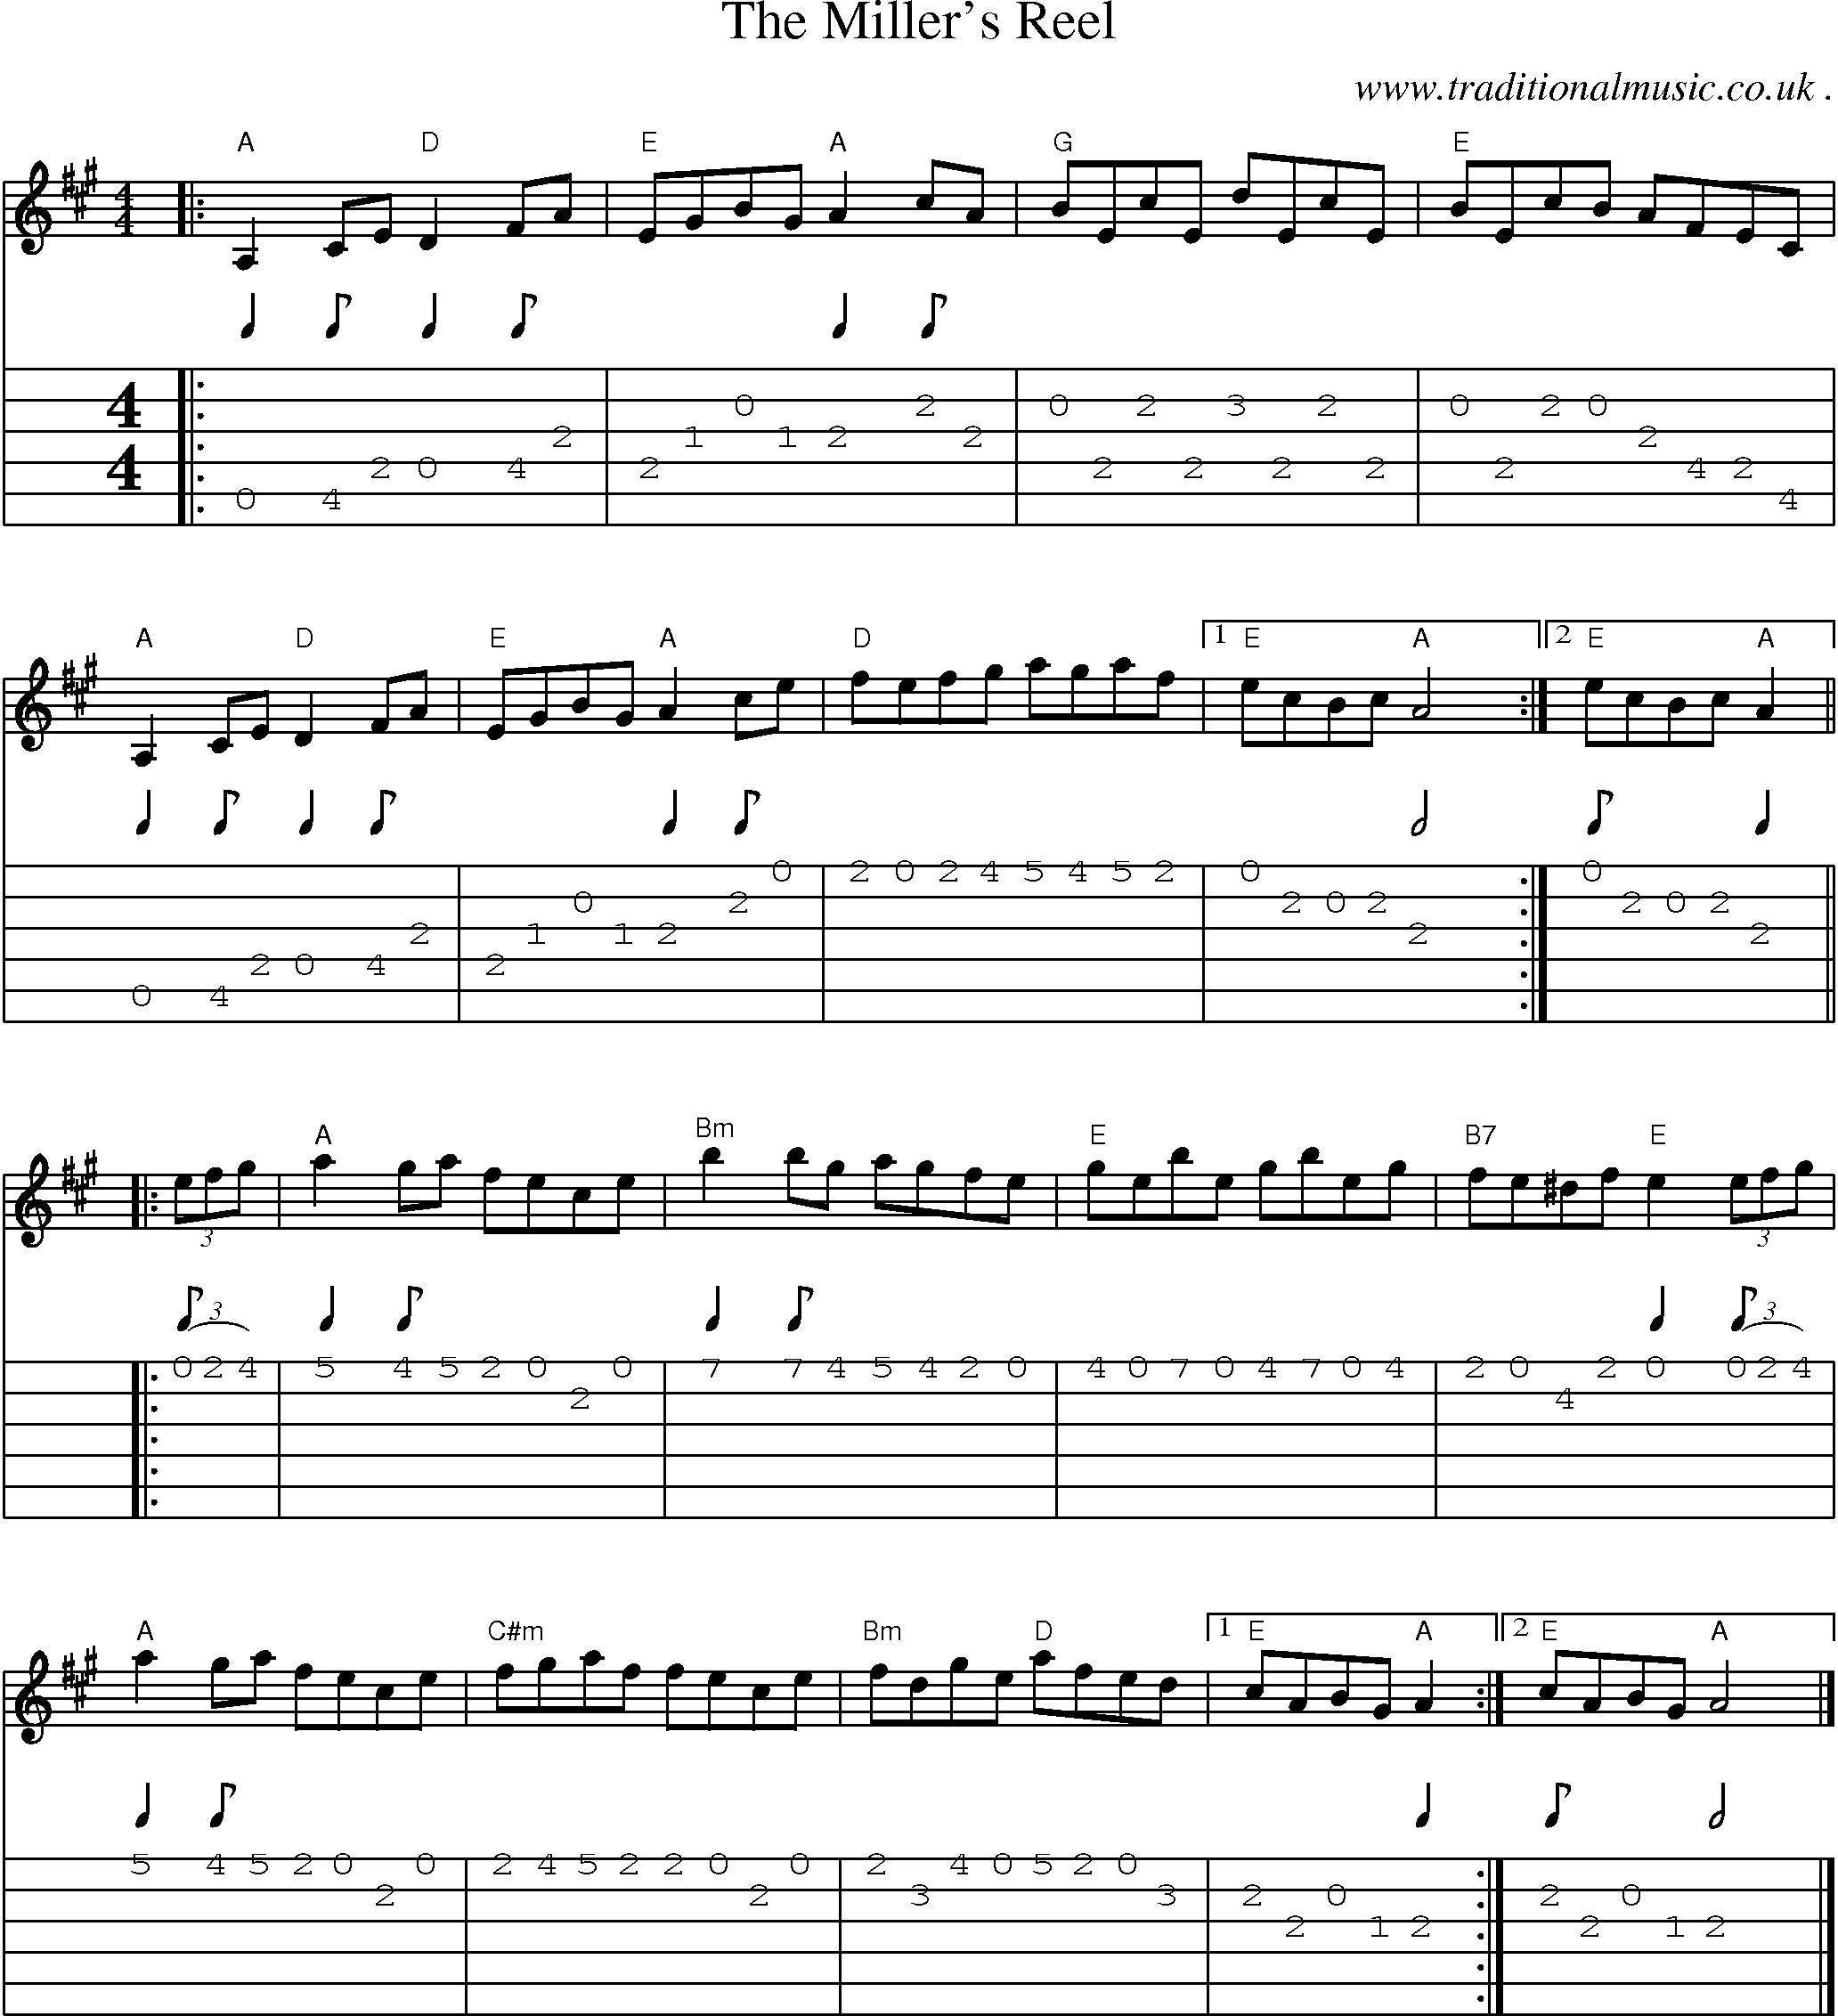 Music Score and Guitar Tabs for The Millers Reel